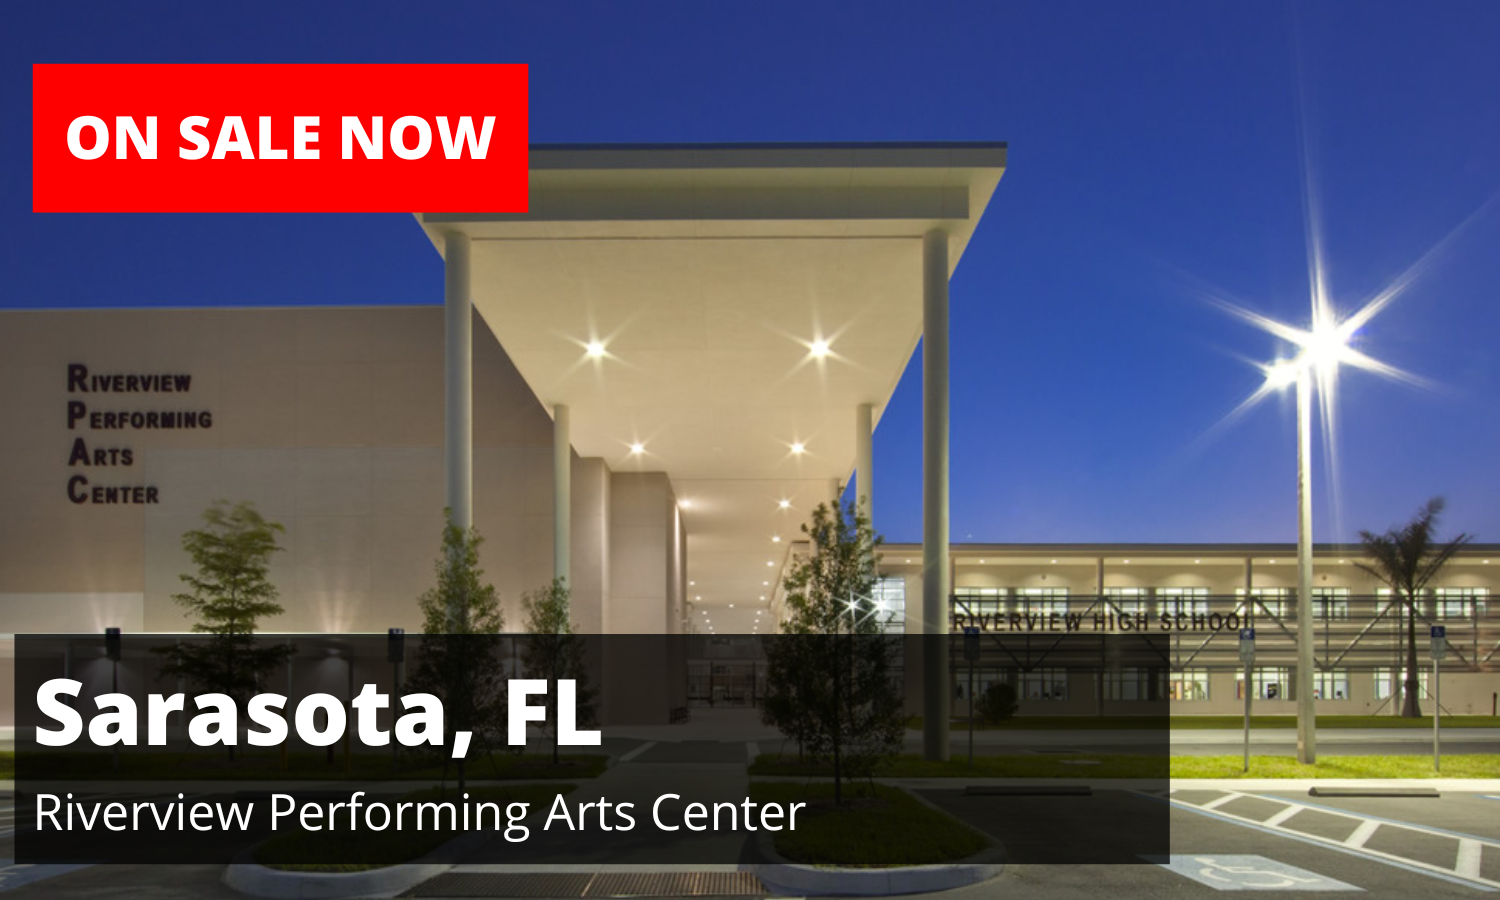 Riverview Performing Arts Center Sarasota Season Tickets ON SALE NOW